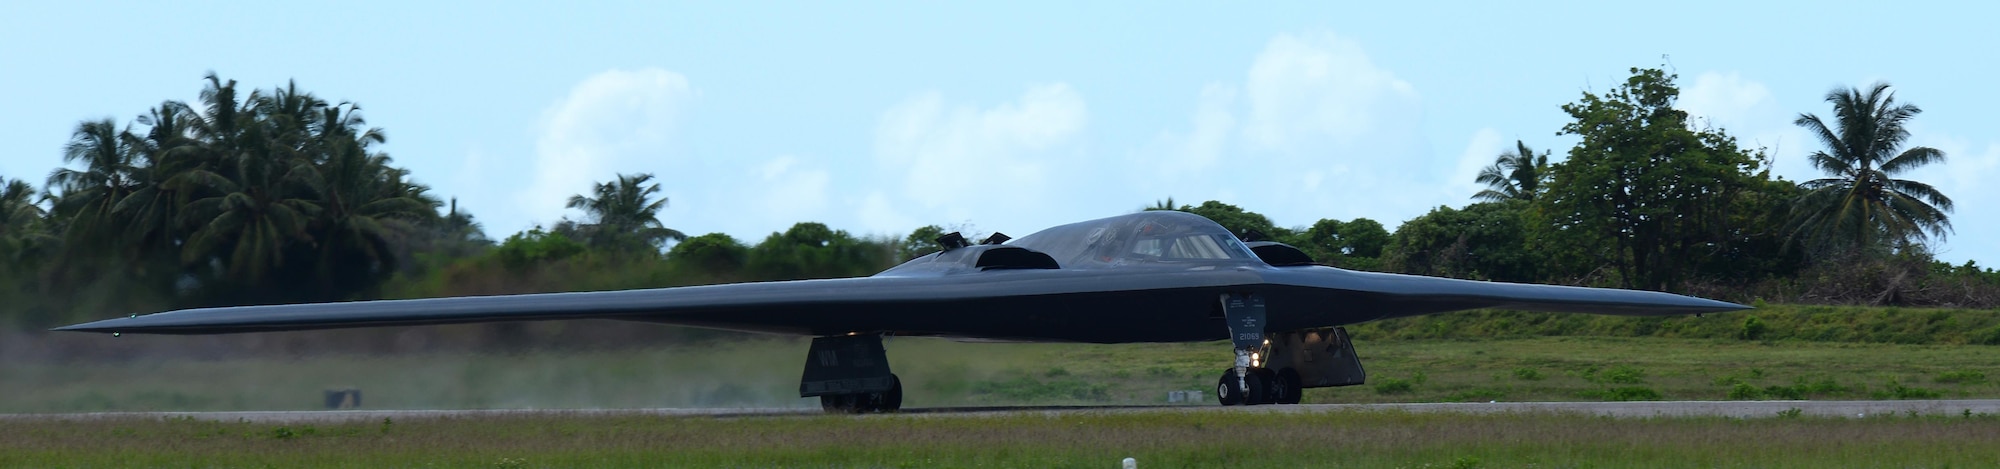 A B-2 Spirit from Whiteman Air Force Base, Mo., lands at an undisclosed location in the U.S. Pacific Command area of operations March 9, 2016. While in the Indo-Asia-Pacific, the B-2s will integrate and conduct training with ally and partner air forces and conduct a radio communications check with a U.S. air operations center. (U.S. Air Force photo by Senior Airman Joel Pfiester/Released)